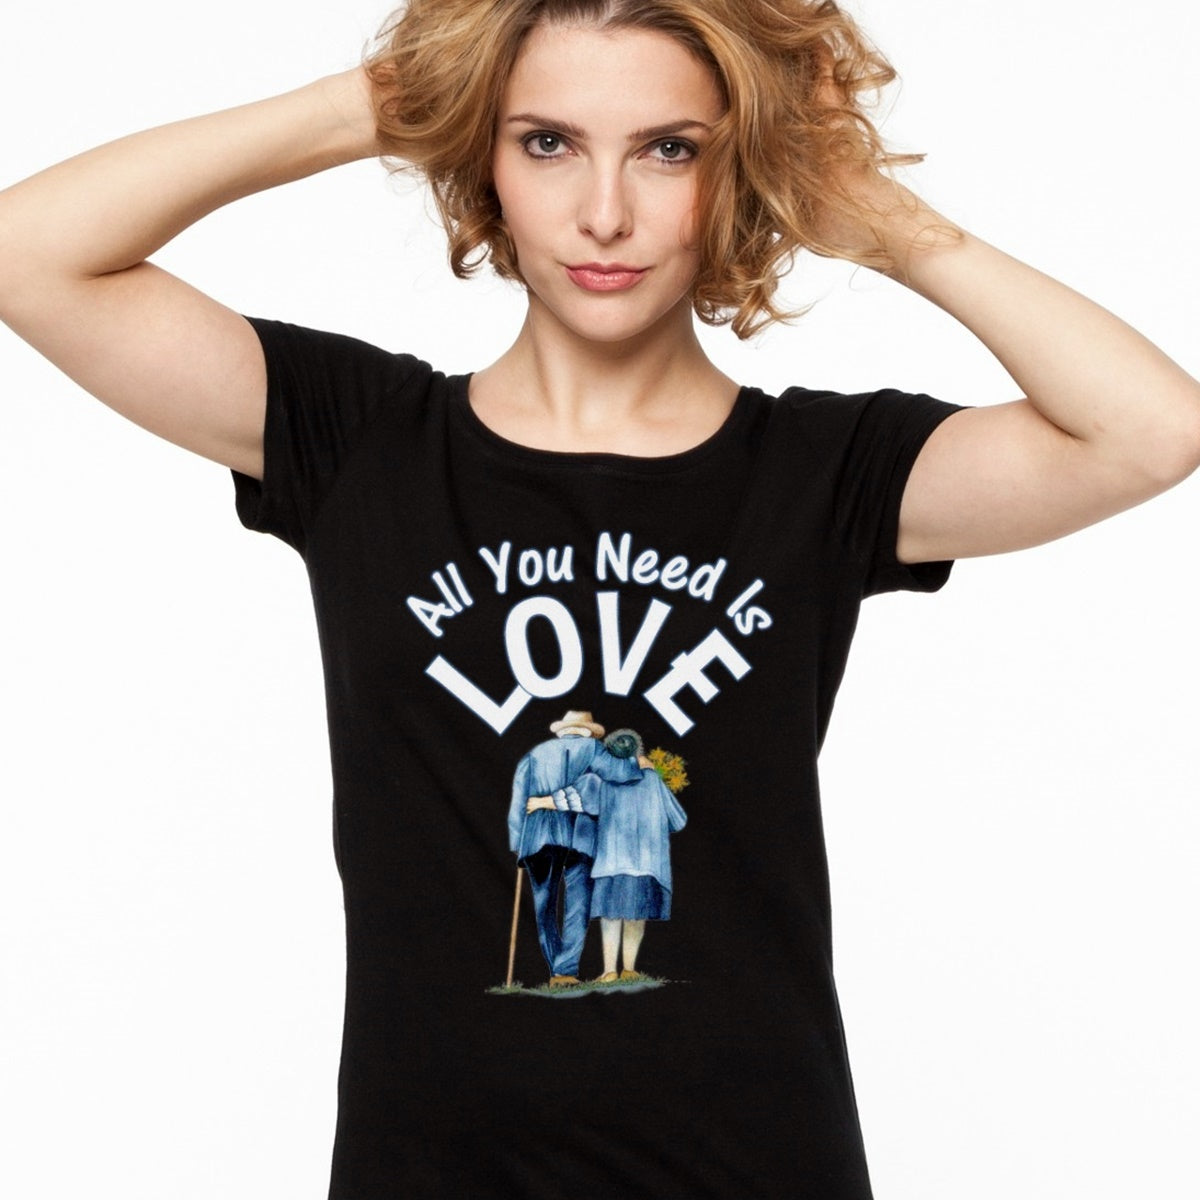 All You Need Is Love - Women's TeeClassically Styled